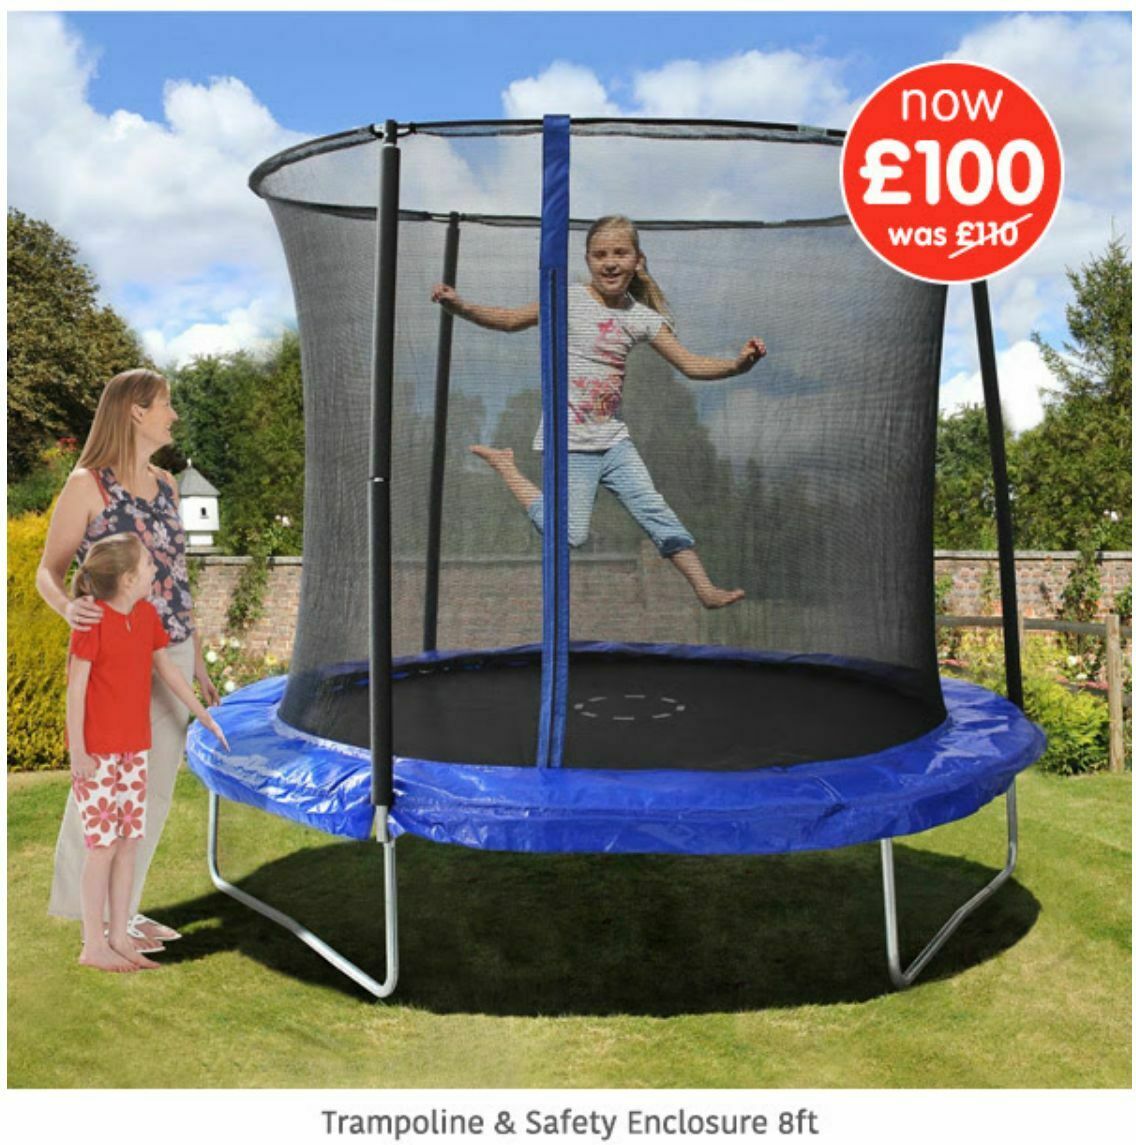 B&M Save on Outdoor Toys Offers from 8 July